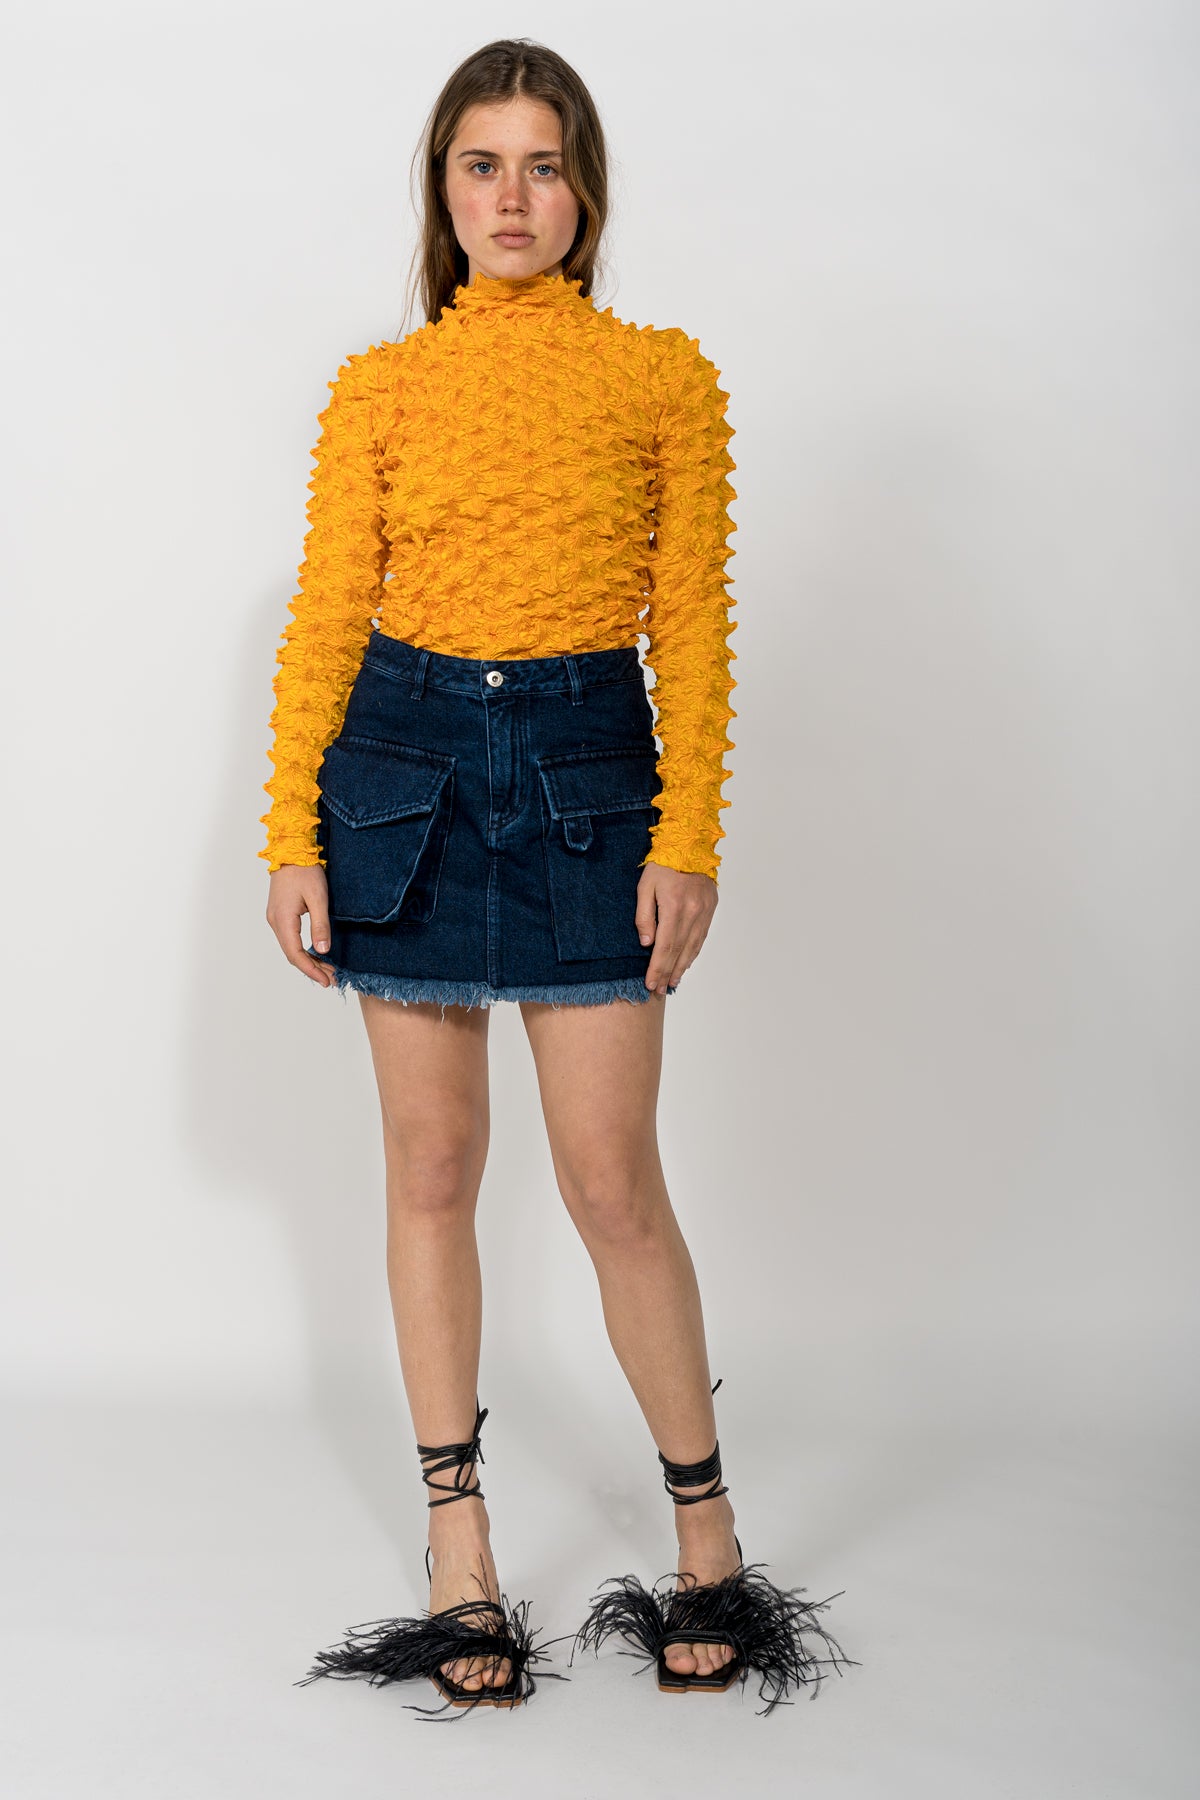 PATCH POCKET MINI SKIRT IN NAVY MARQUES ALMEIDA